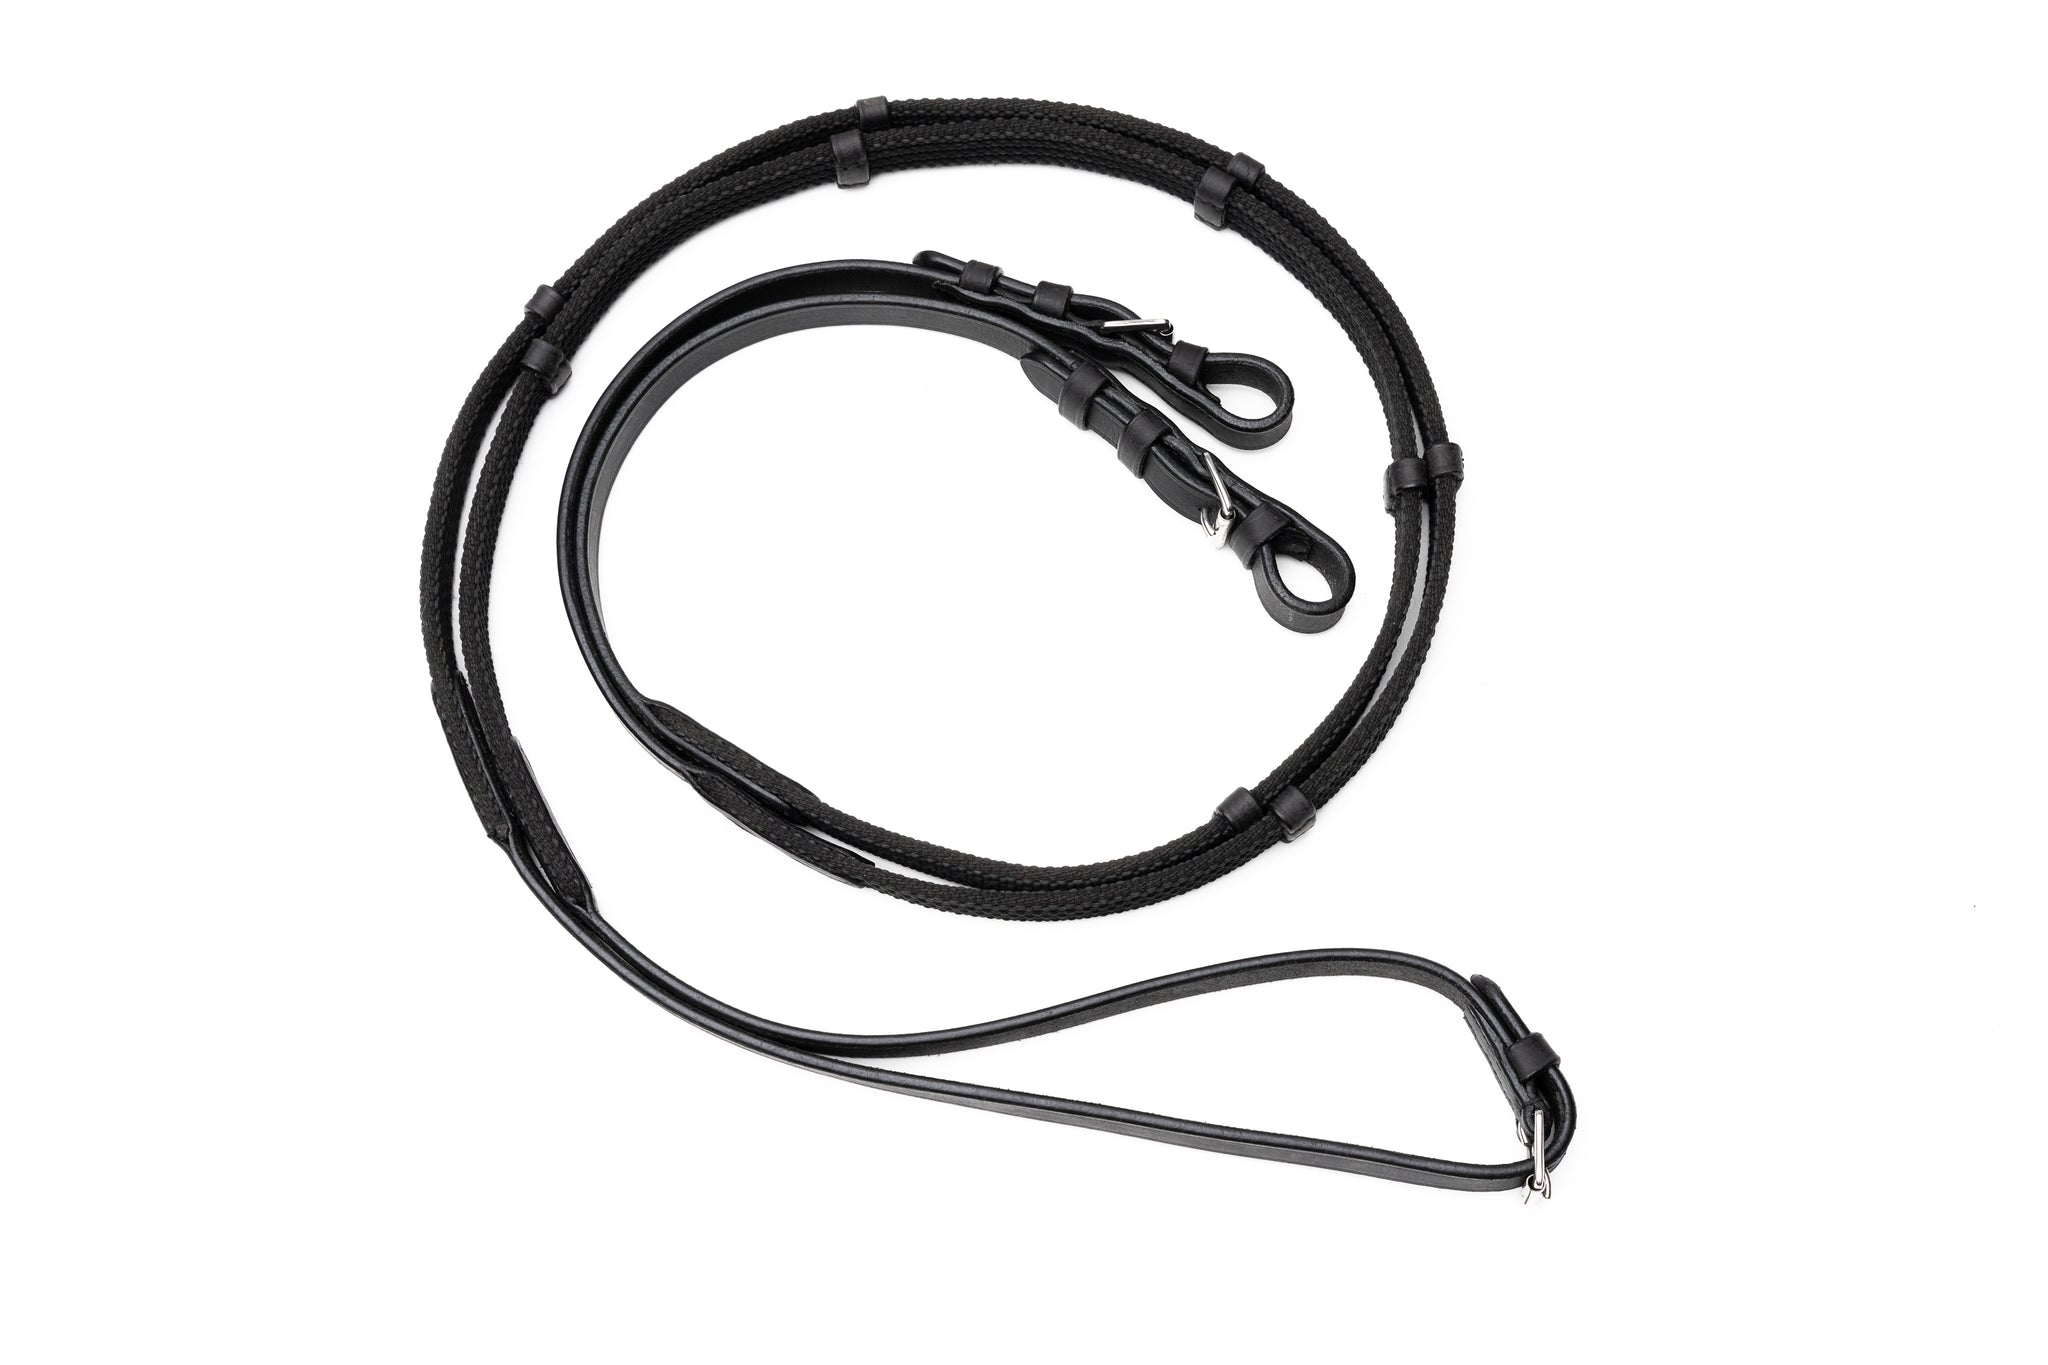 Sure Grip Rubber Reins with Rein Stops-Superb Slim Rubber Woven Grip